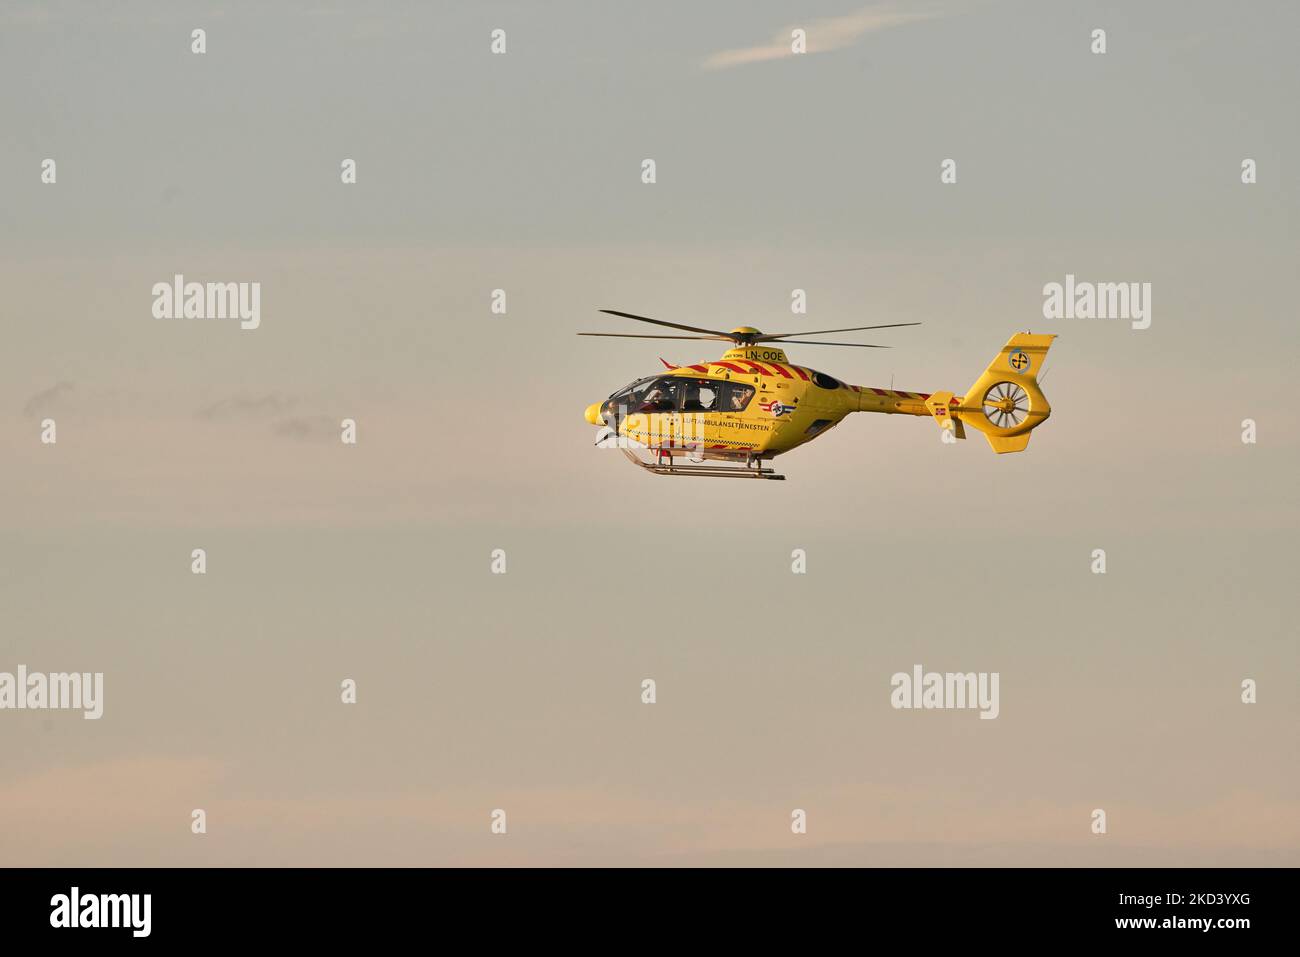 A helicopter from the Norwegian Air Ambulance comes in for landing near Stavanger University Hospital. Stock Photo